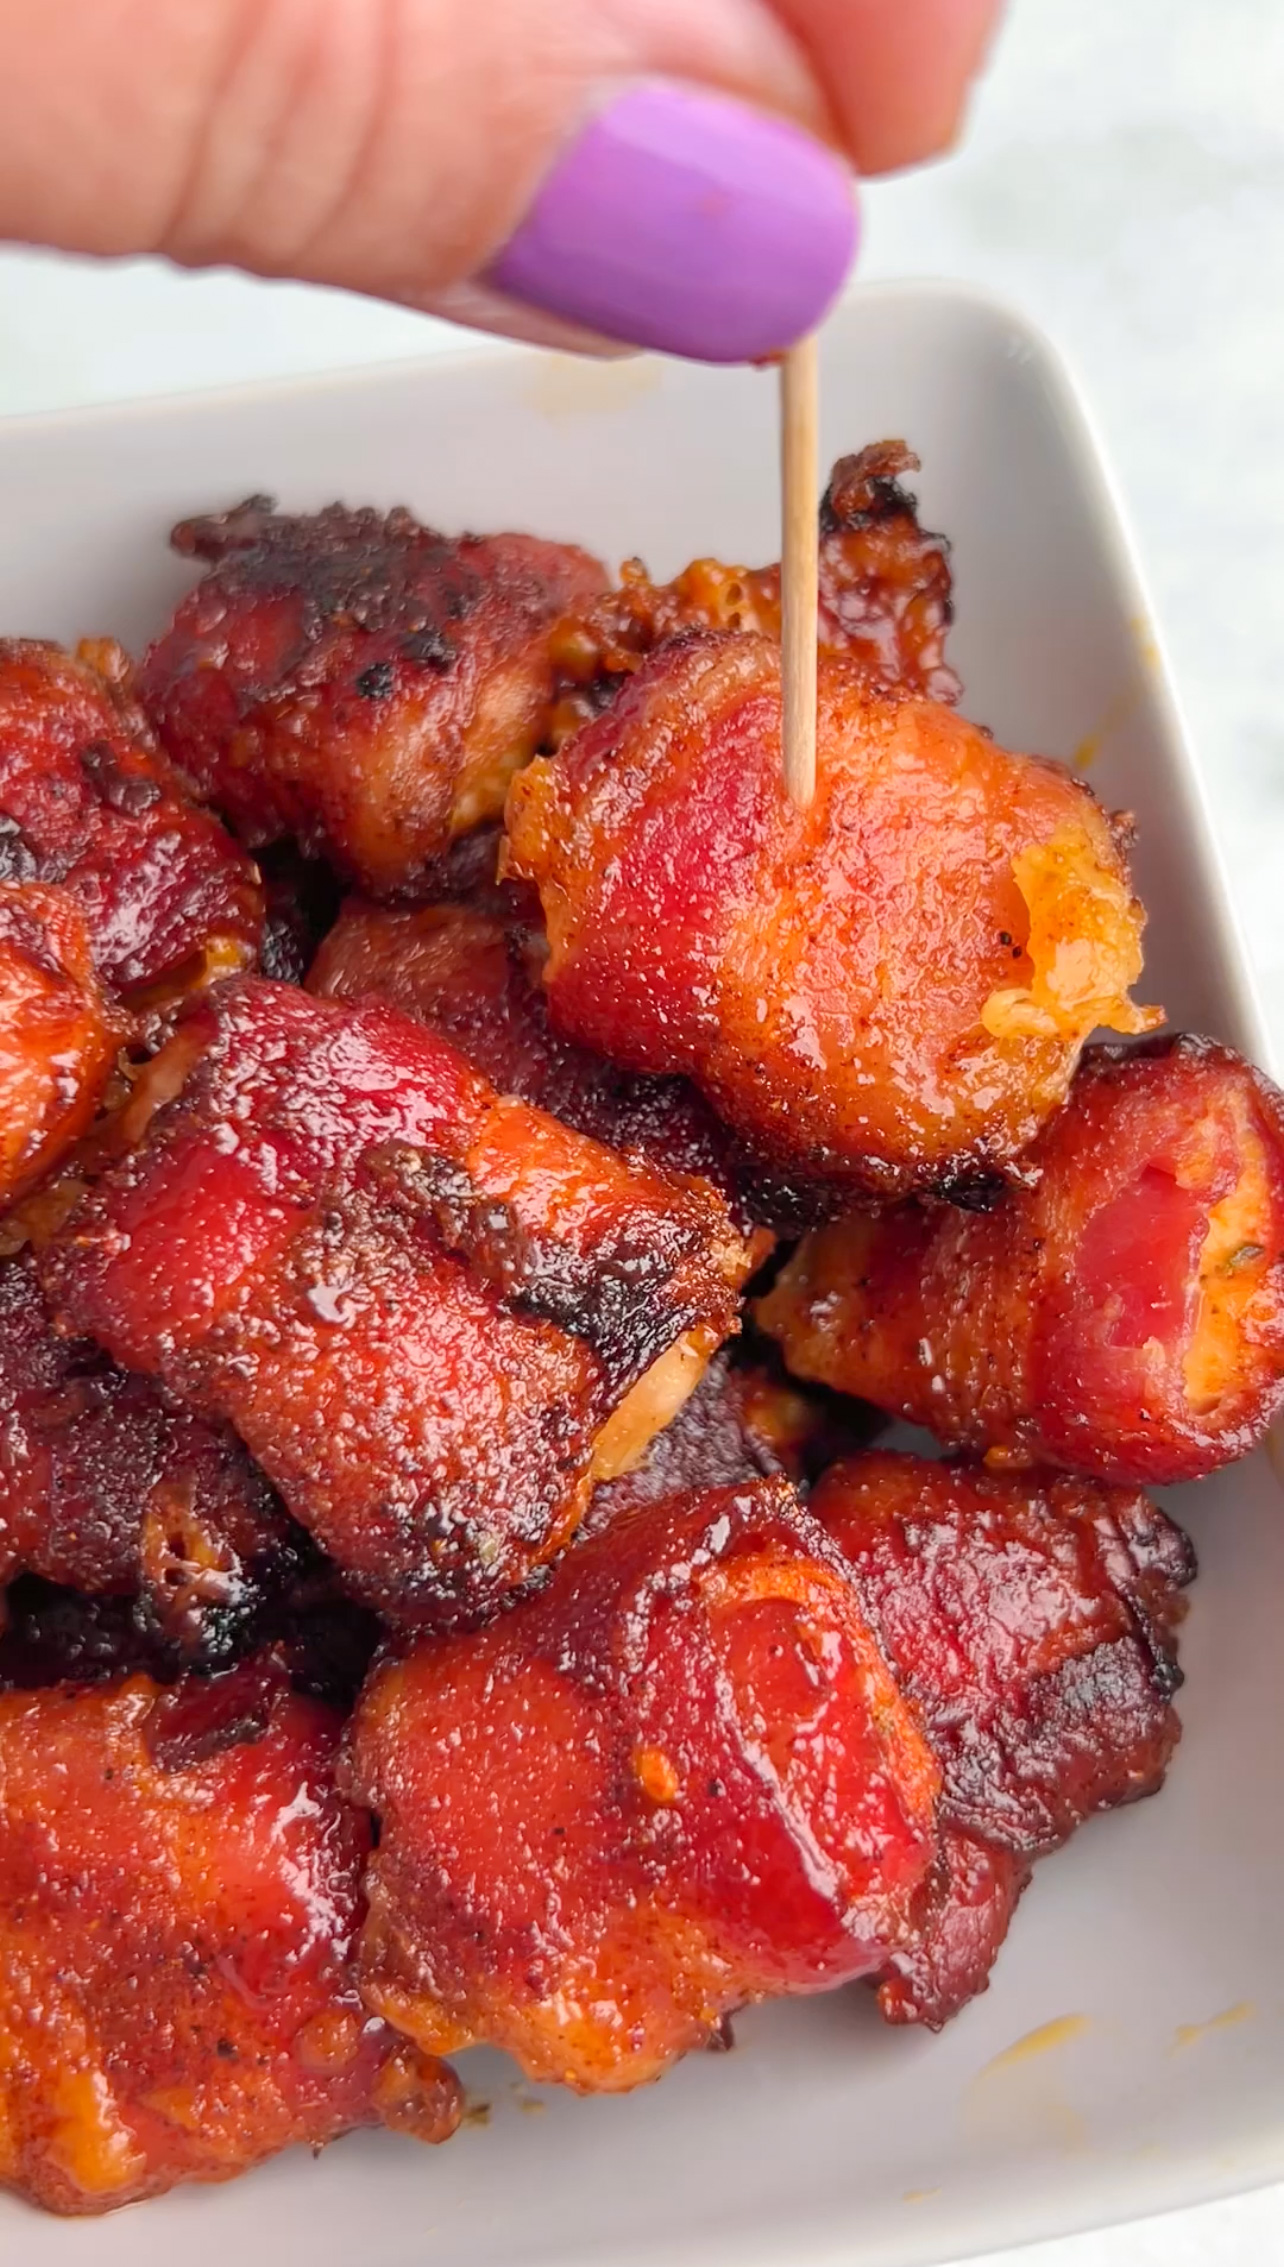 Bacon wrapped chicken bites